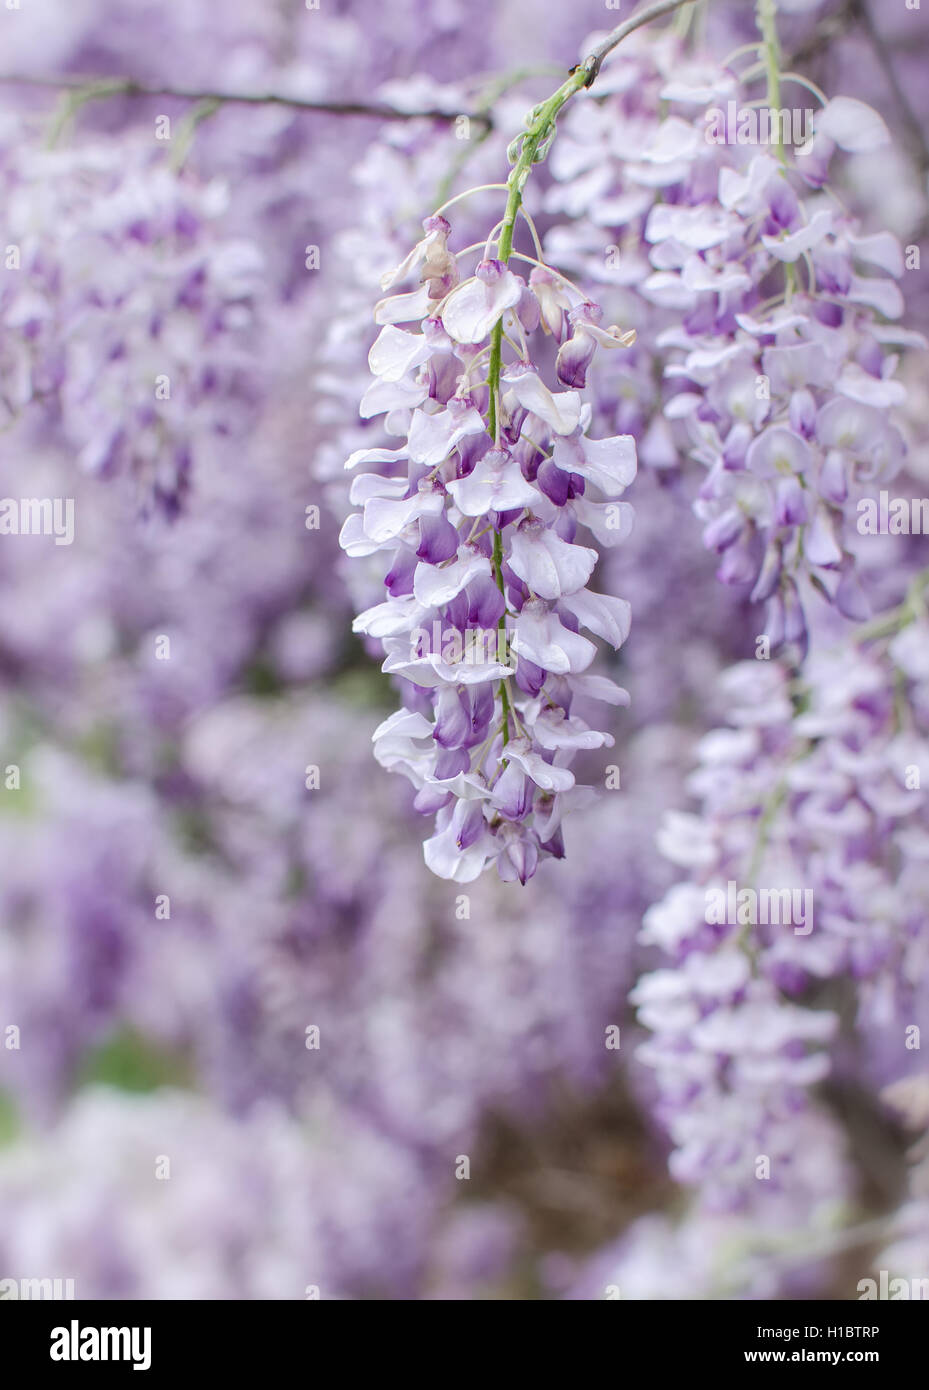 Wisteria flowers blooming in spring Stock Photo